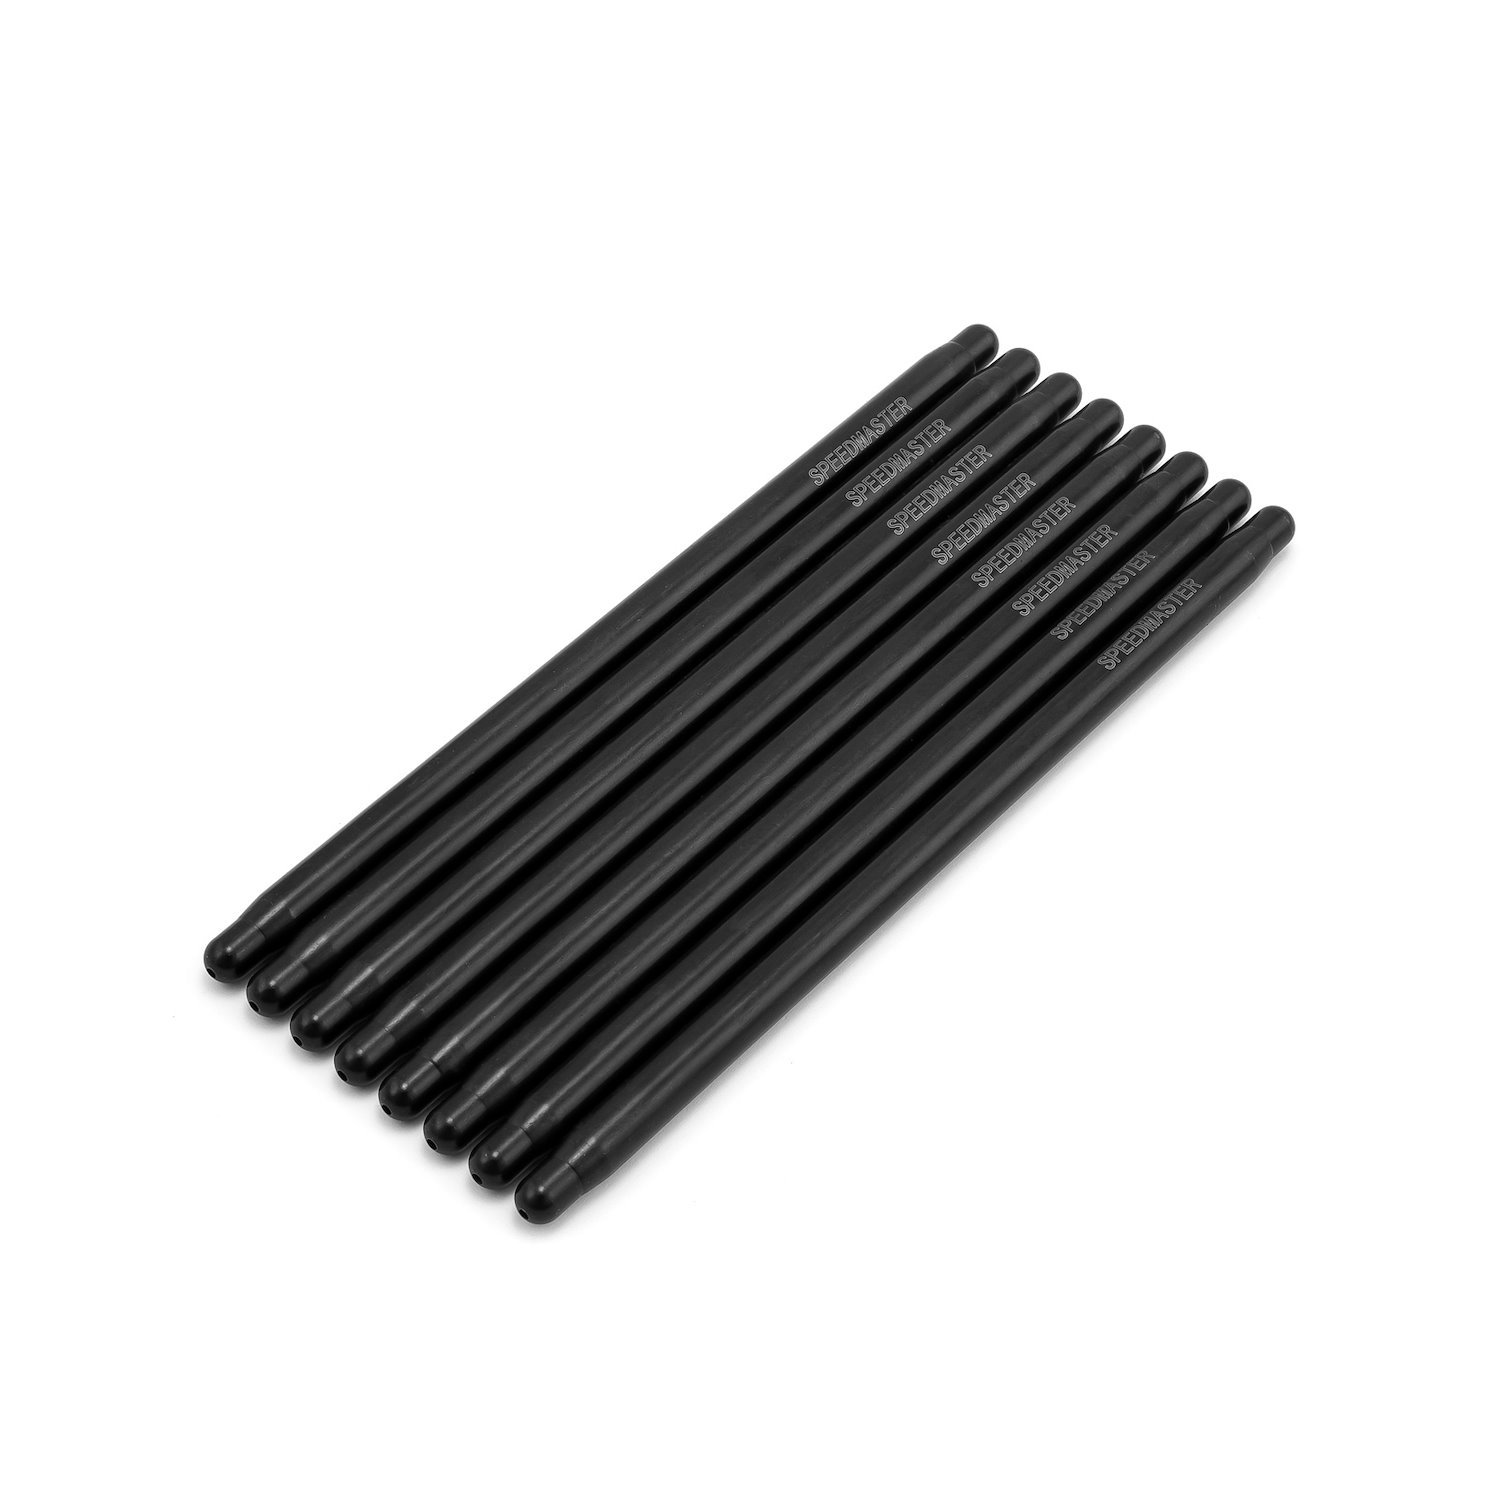 1-254-027 7.900 in. Chromoly Heat-Treated 3/8 in. 0.080 in. Wall DNA One-Piece Pushrods